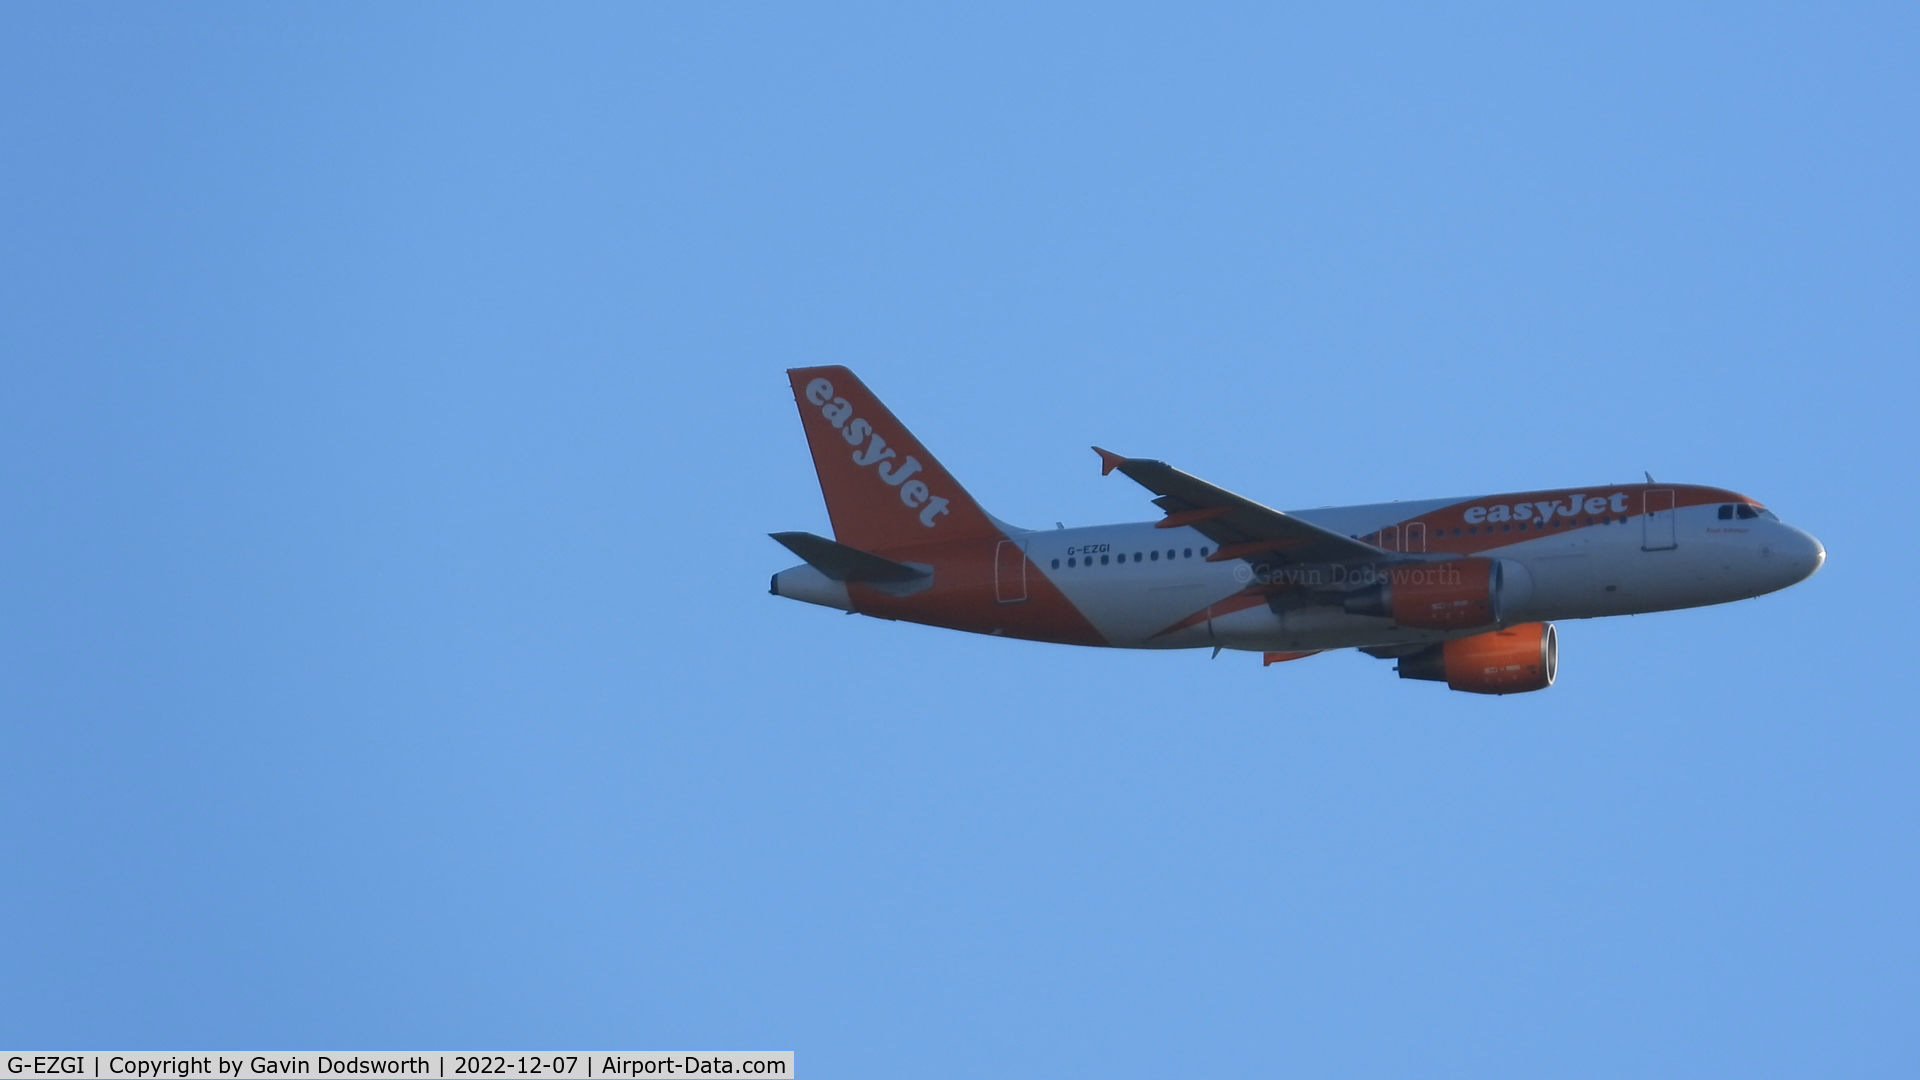 G-EZGI, 2011 Airbus A319-111 C/N 4693, Over Darlington on December 7th 2022 whilst on crew training at Teesside Airport